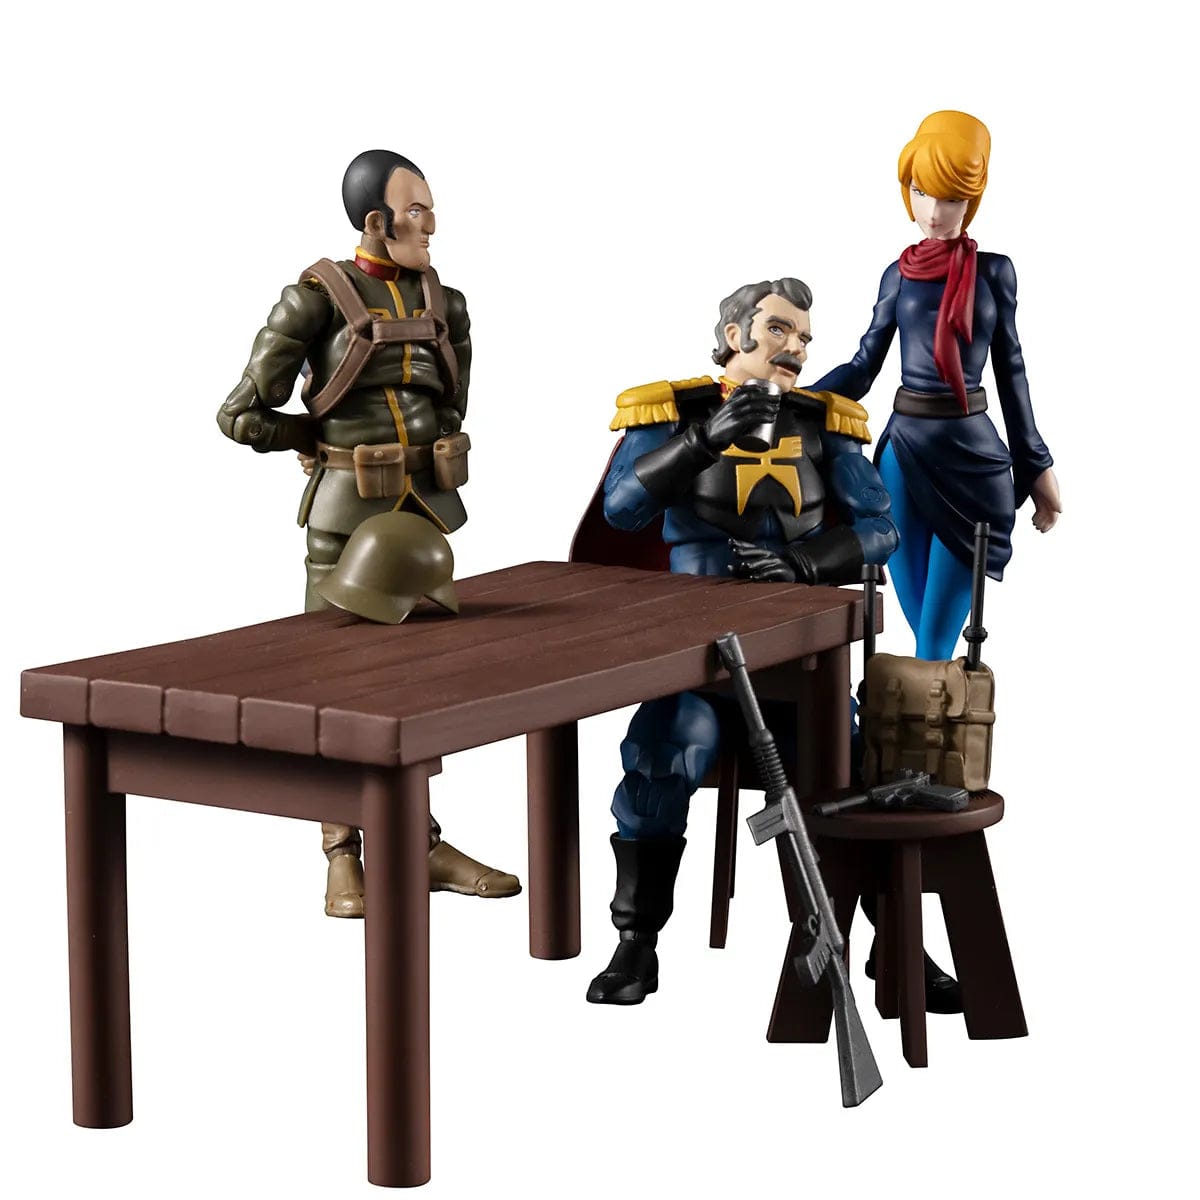 Megahouse Mobile Suit Gundam G.M.G. (Gundam Military Generation) Principality of Zeon Team Ramba Ral set ( with gift : extra props )